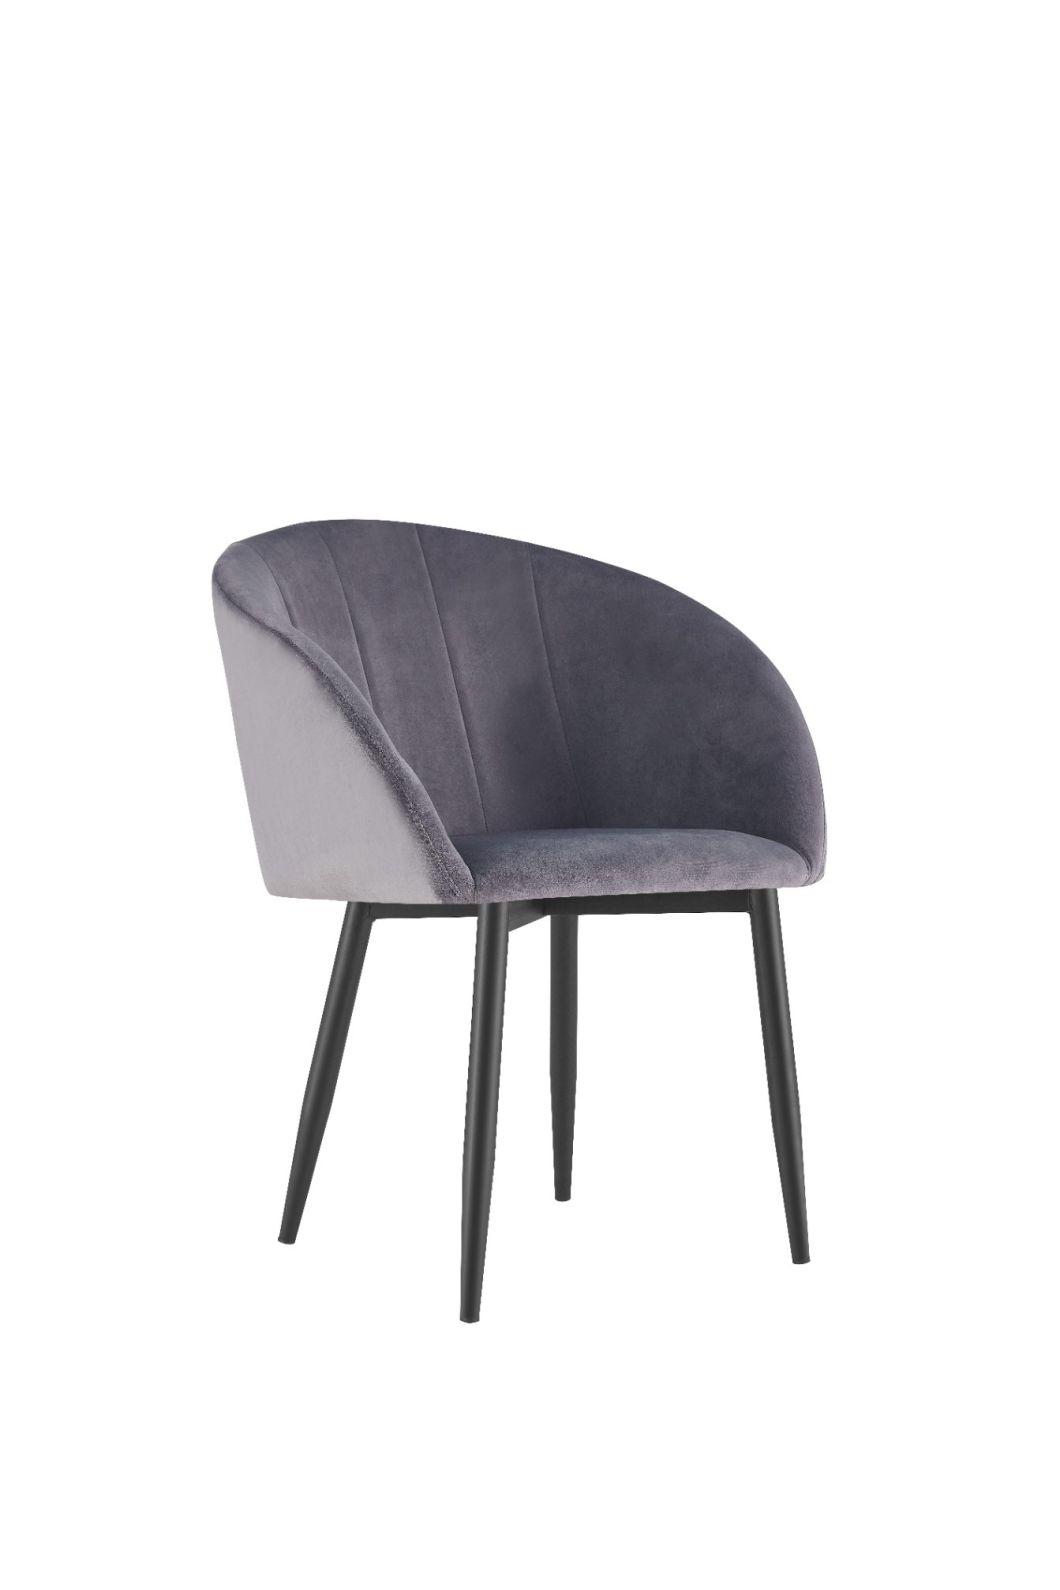 Contemporary Velvet Upholstered Fabric Dining Chairs with Arms for Dining Table